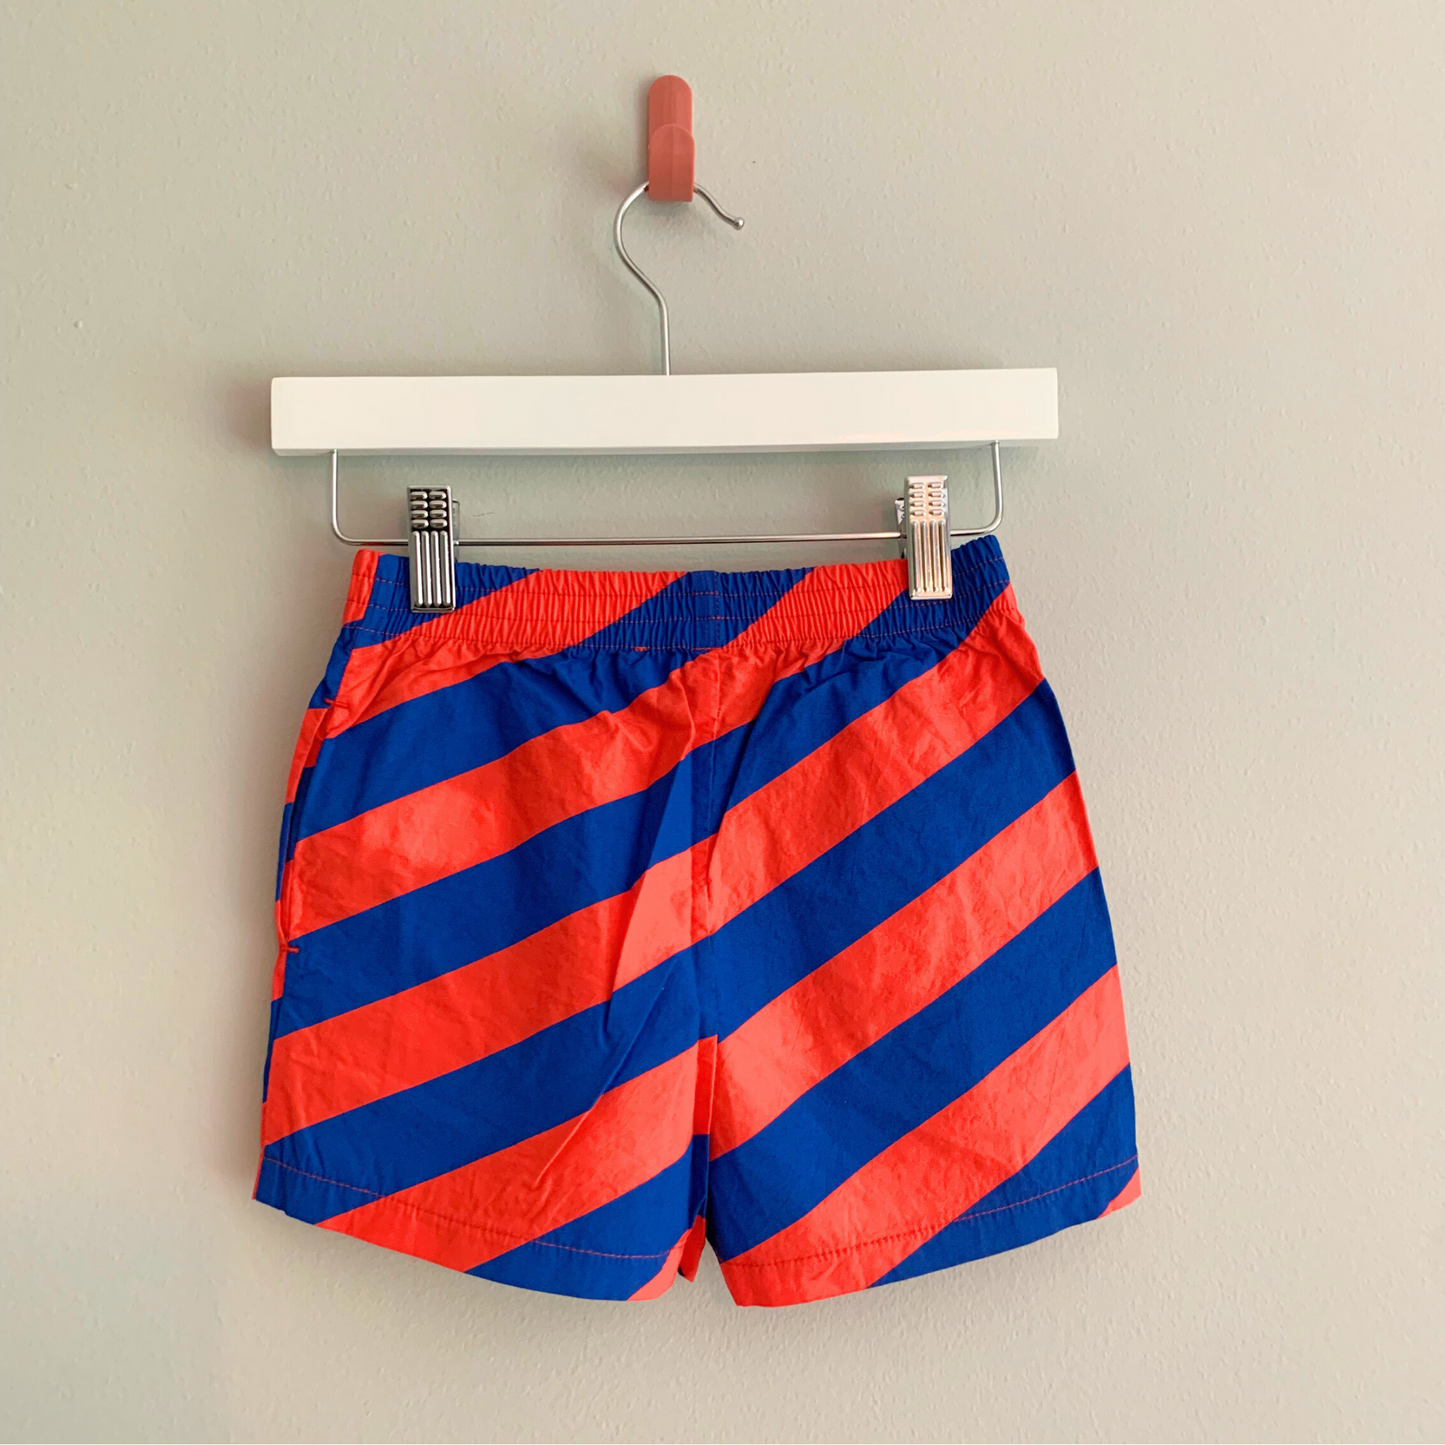 Red Stripes Pelican Shorts (New with Tags) - Size 4T